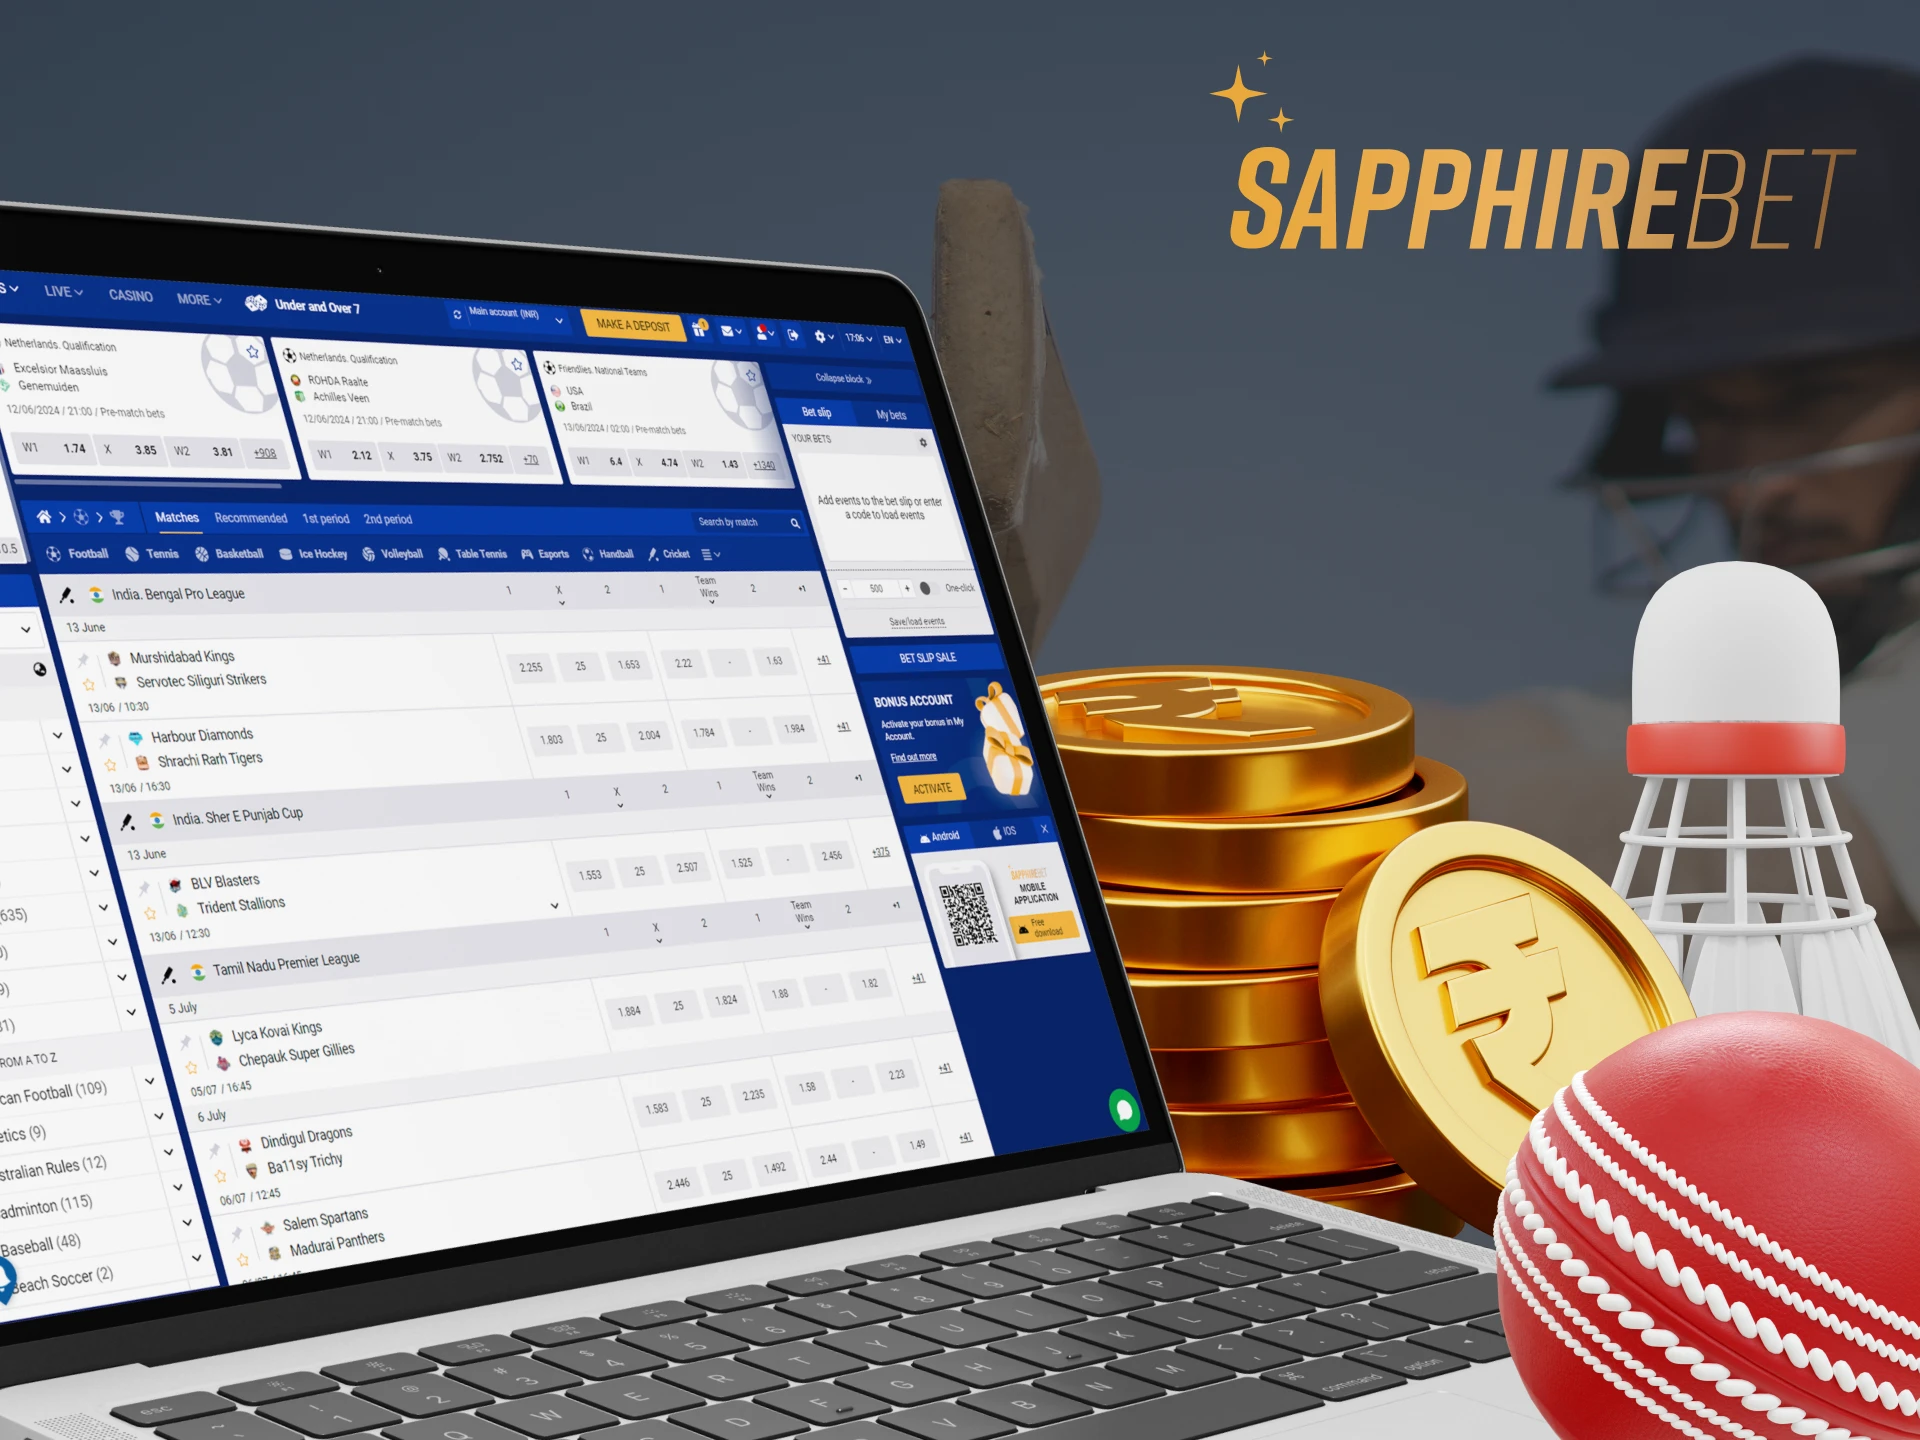 Sapphirebet has excellent odds and chances of winning in sports betting.